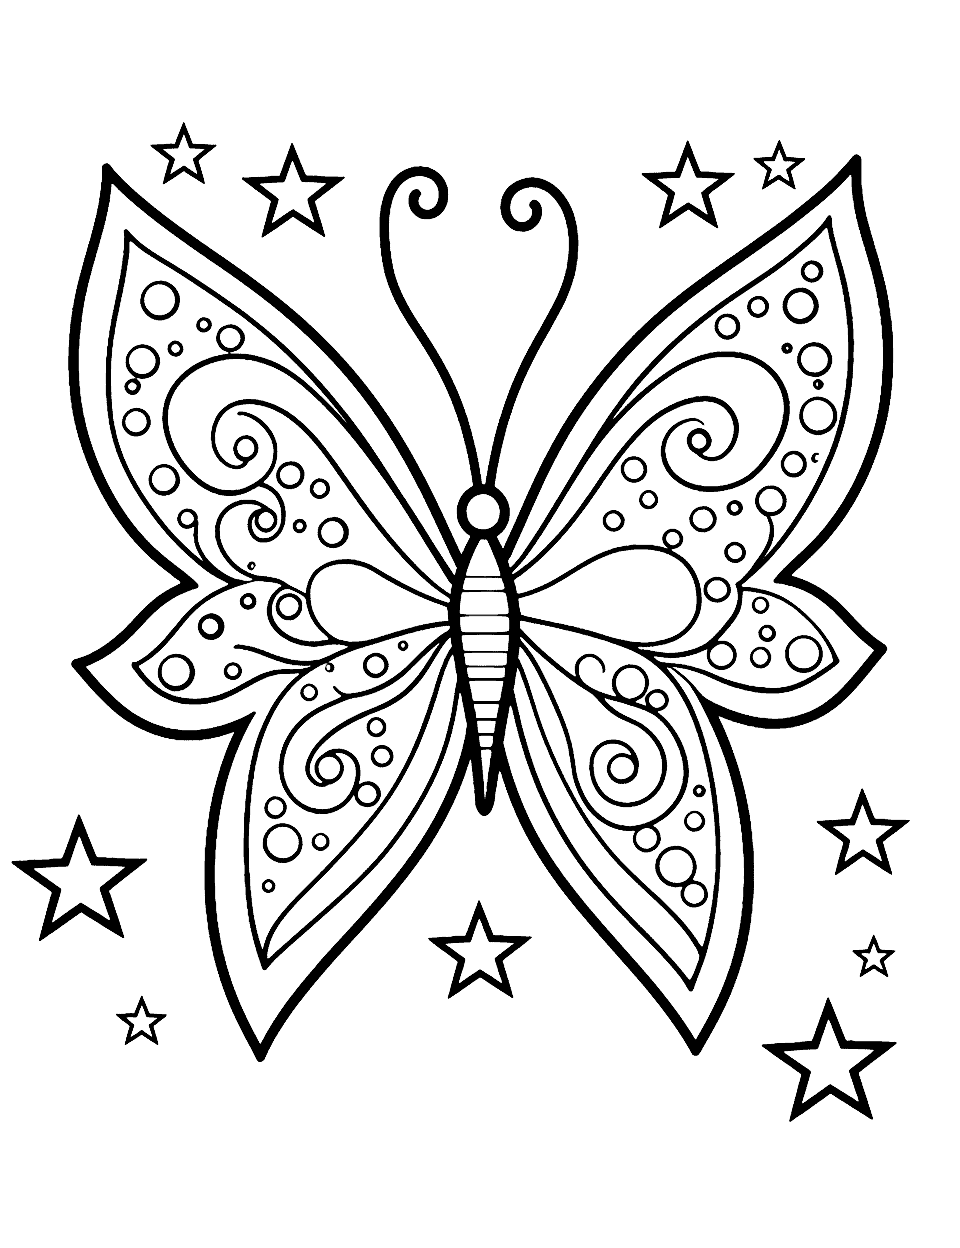 Star and Butterfly Coloring Page - A butterfly with wings shaped like stars.